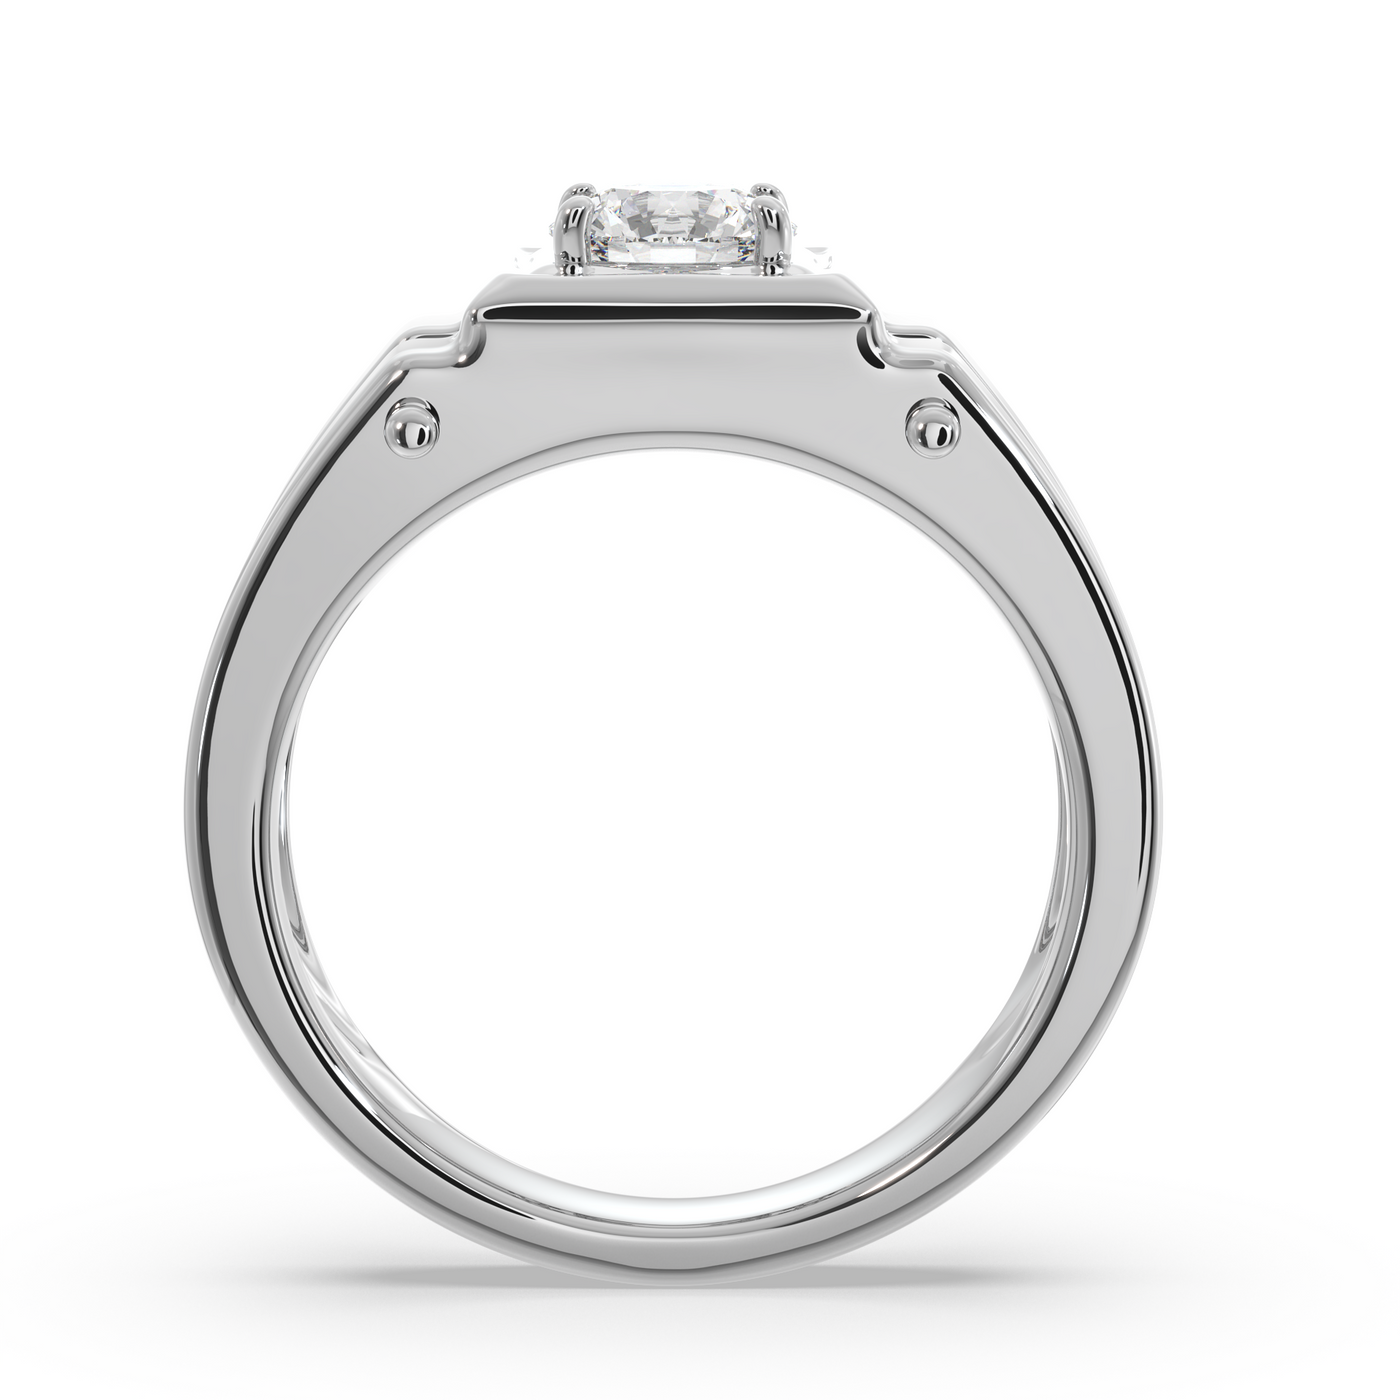 SY Men's Ring in Gold, Four Prong Solitaire Ring